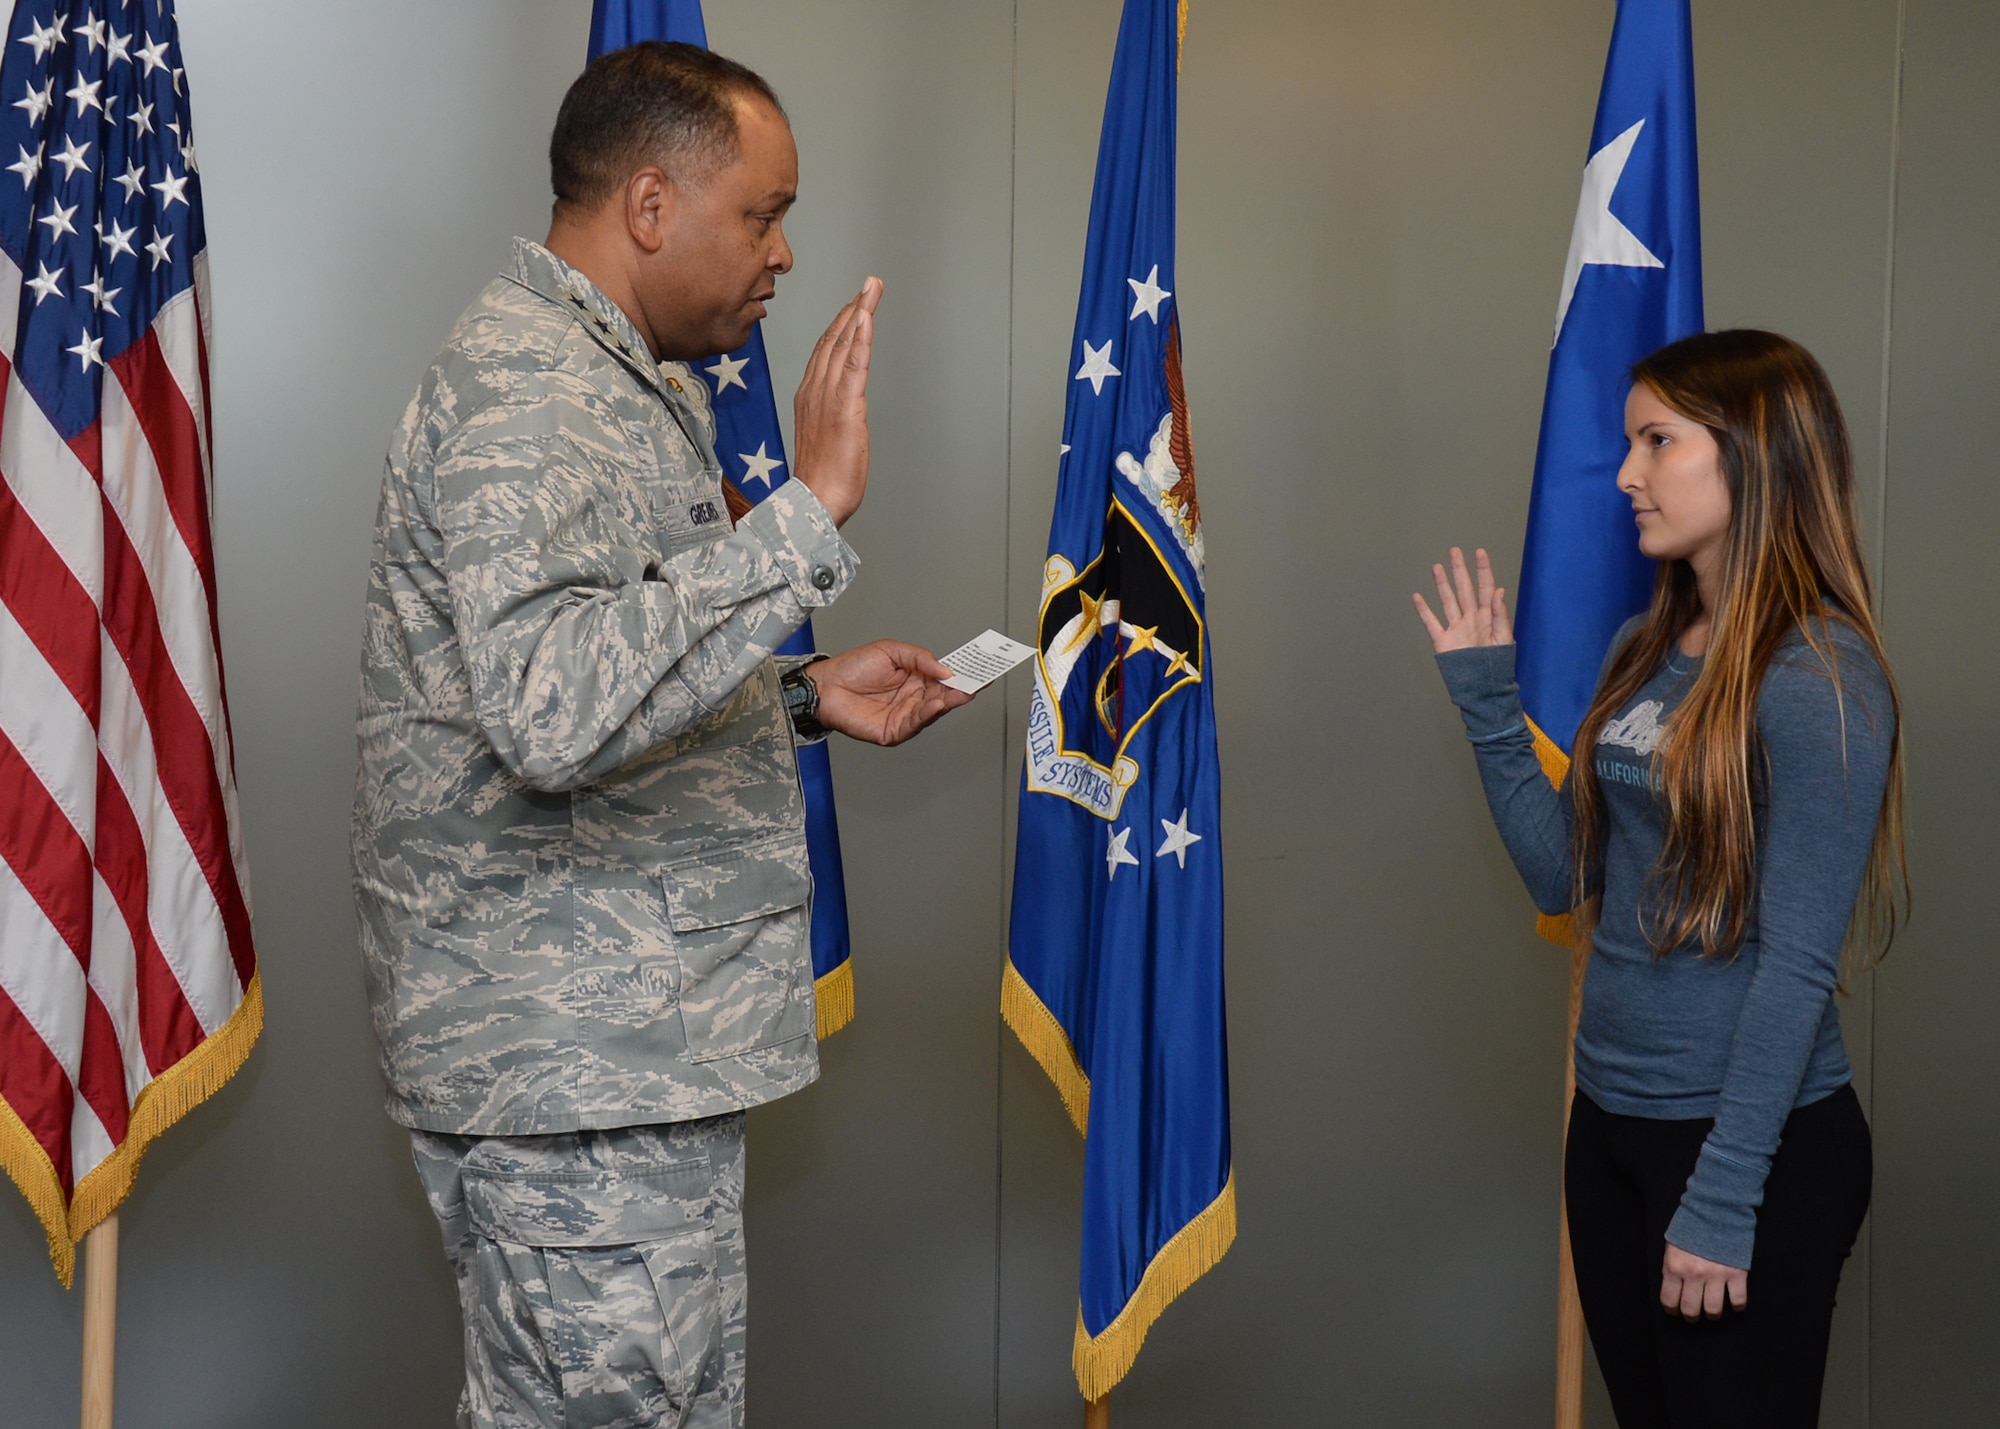 Lt. Gen. Samuel Greaves, Space and Missile Systems Center commander and Air Force program executive officer for space, conducts an impromptu swearing-in ceremony with Air Force Reserve recruit Jennie Ines. The event transpired as the result of a chance meeting the previous December by the Exchange at Los Angeles Air Force Base in El Segundo, Calif. (U.S. Air Force photo/Van Ha)